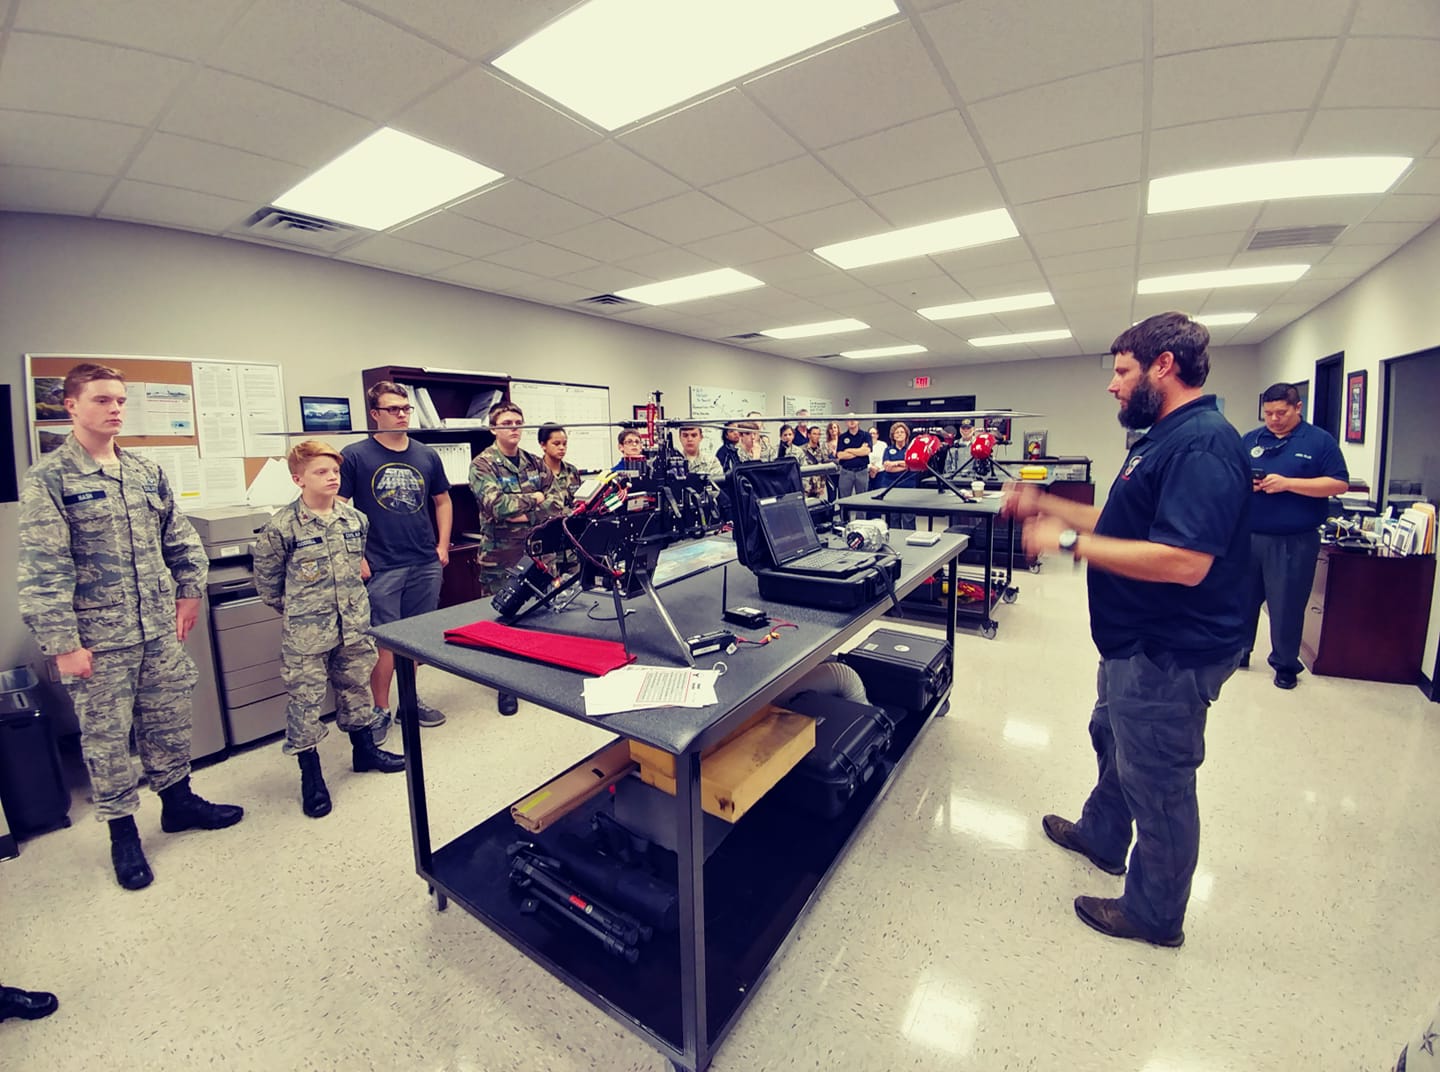 GNTC alum Patrick Hayes (right), UAS, Maintenance Lead for Phoenix Air Unmanned, demonstrates a Pulse Aerospace Vapor 55 to a student group.